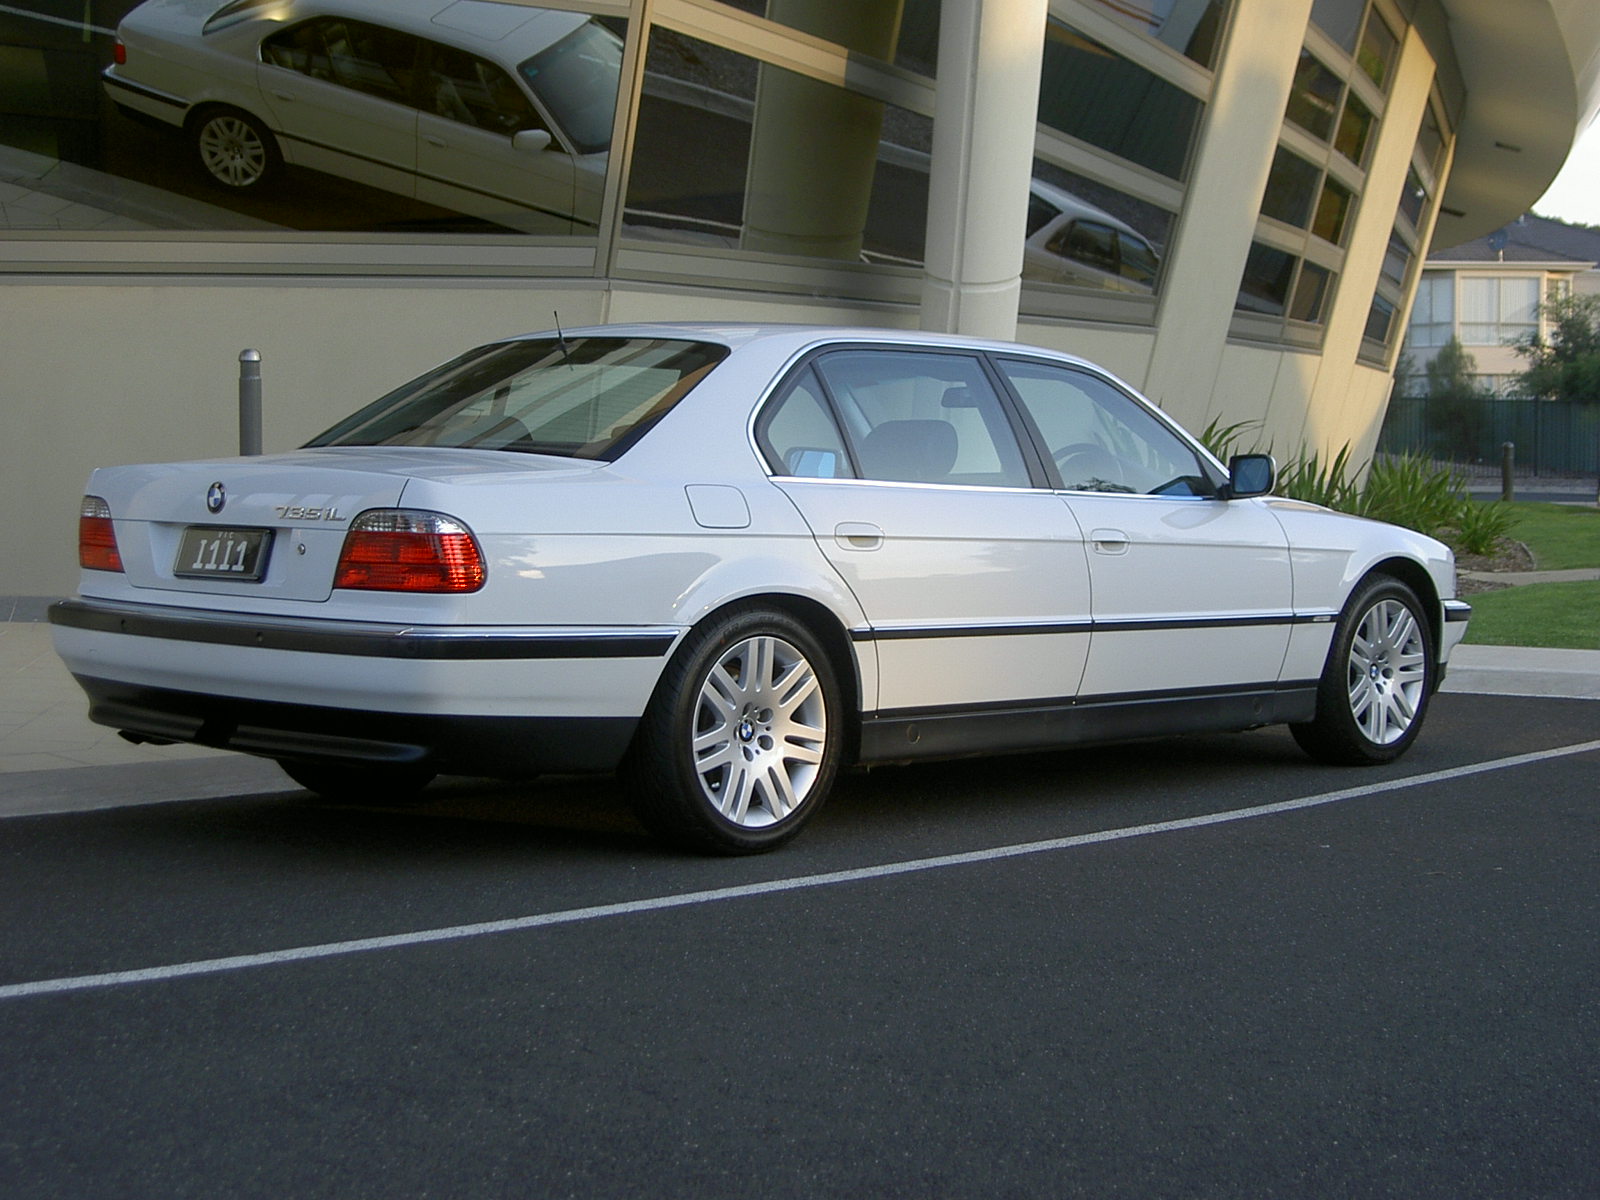 Sled 300s 1998 BMW 735il on 18's 2 - 1